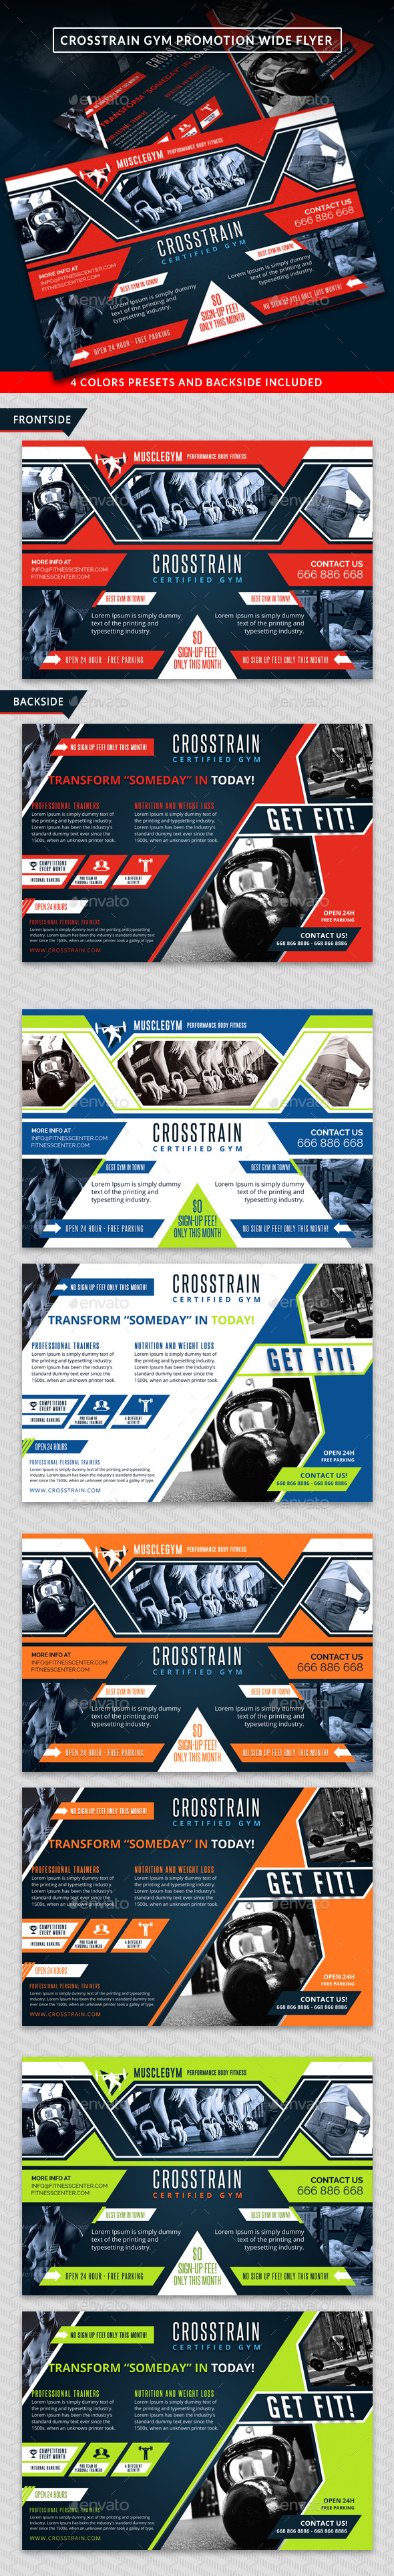 Cross Training Gym Promotion Wide Flyer